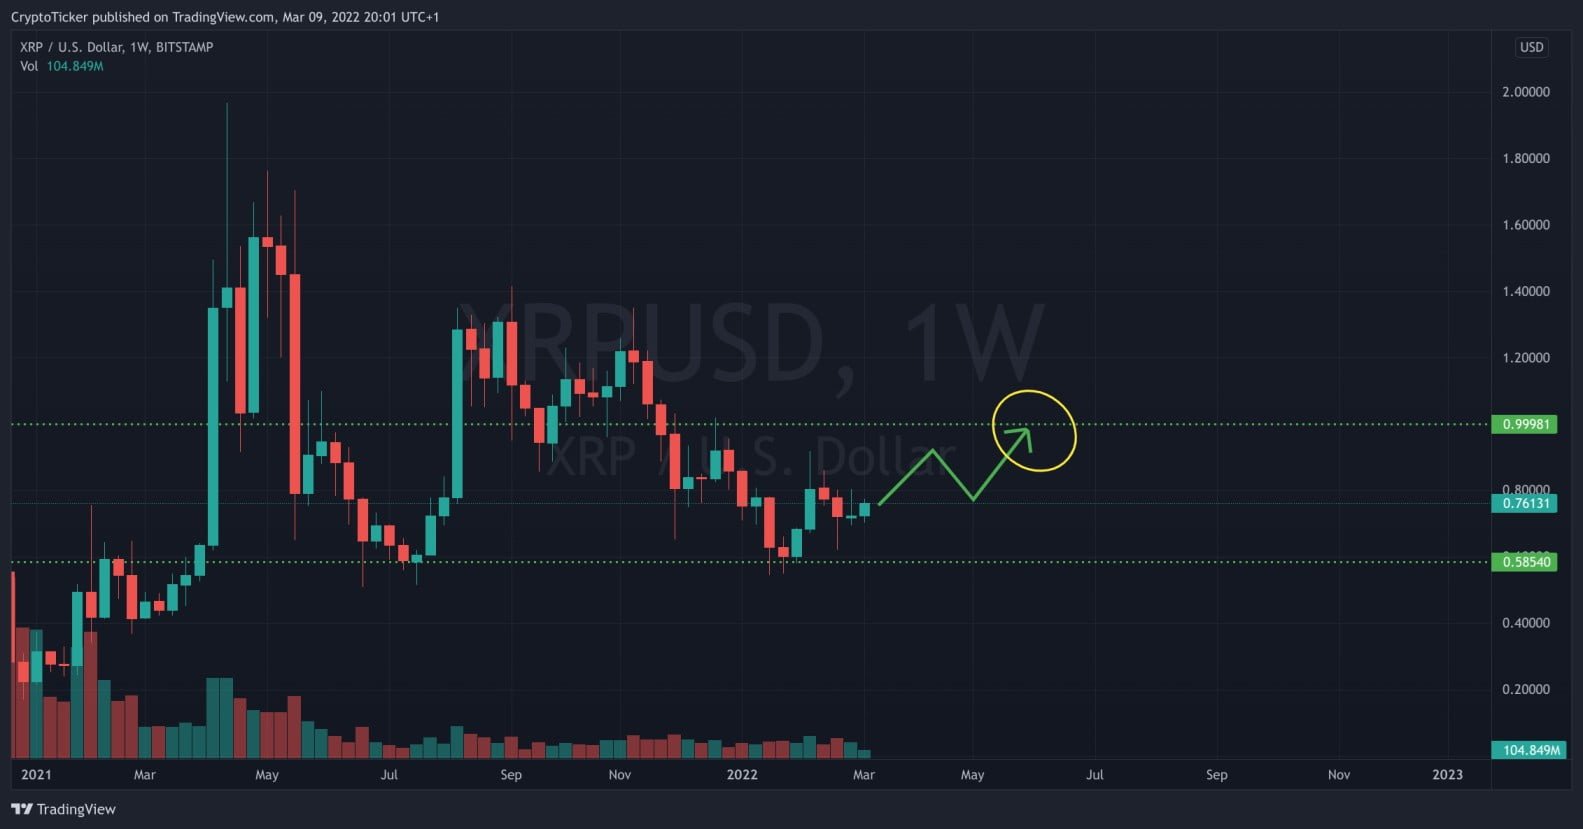 XRP/USD 1-week chart showing the potential upside of XRP